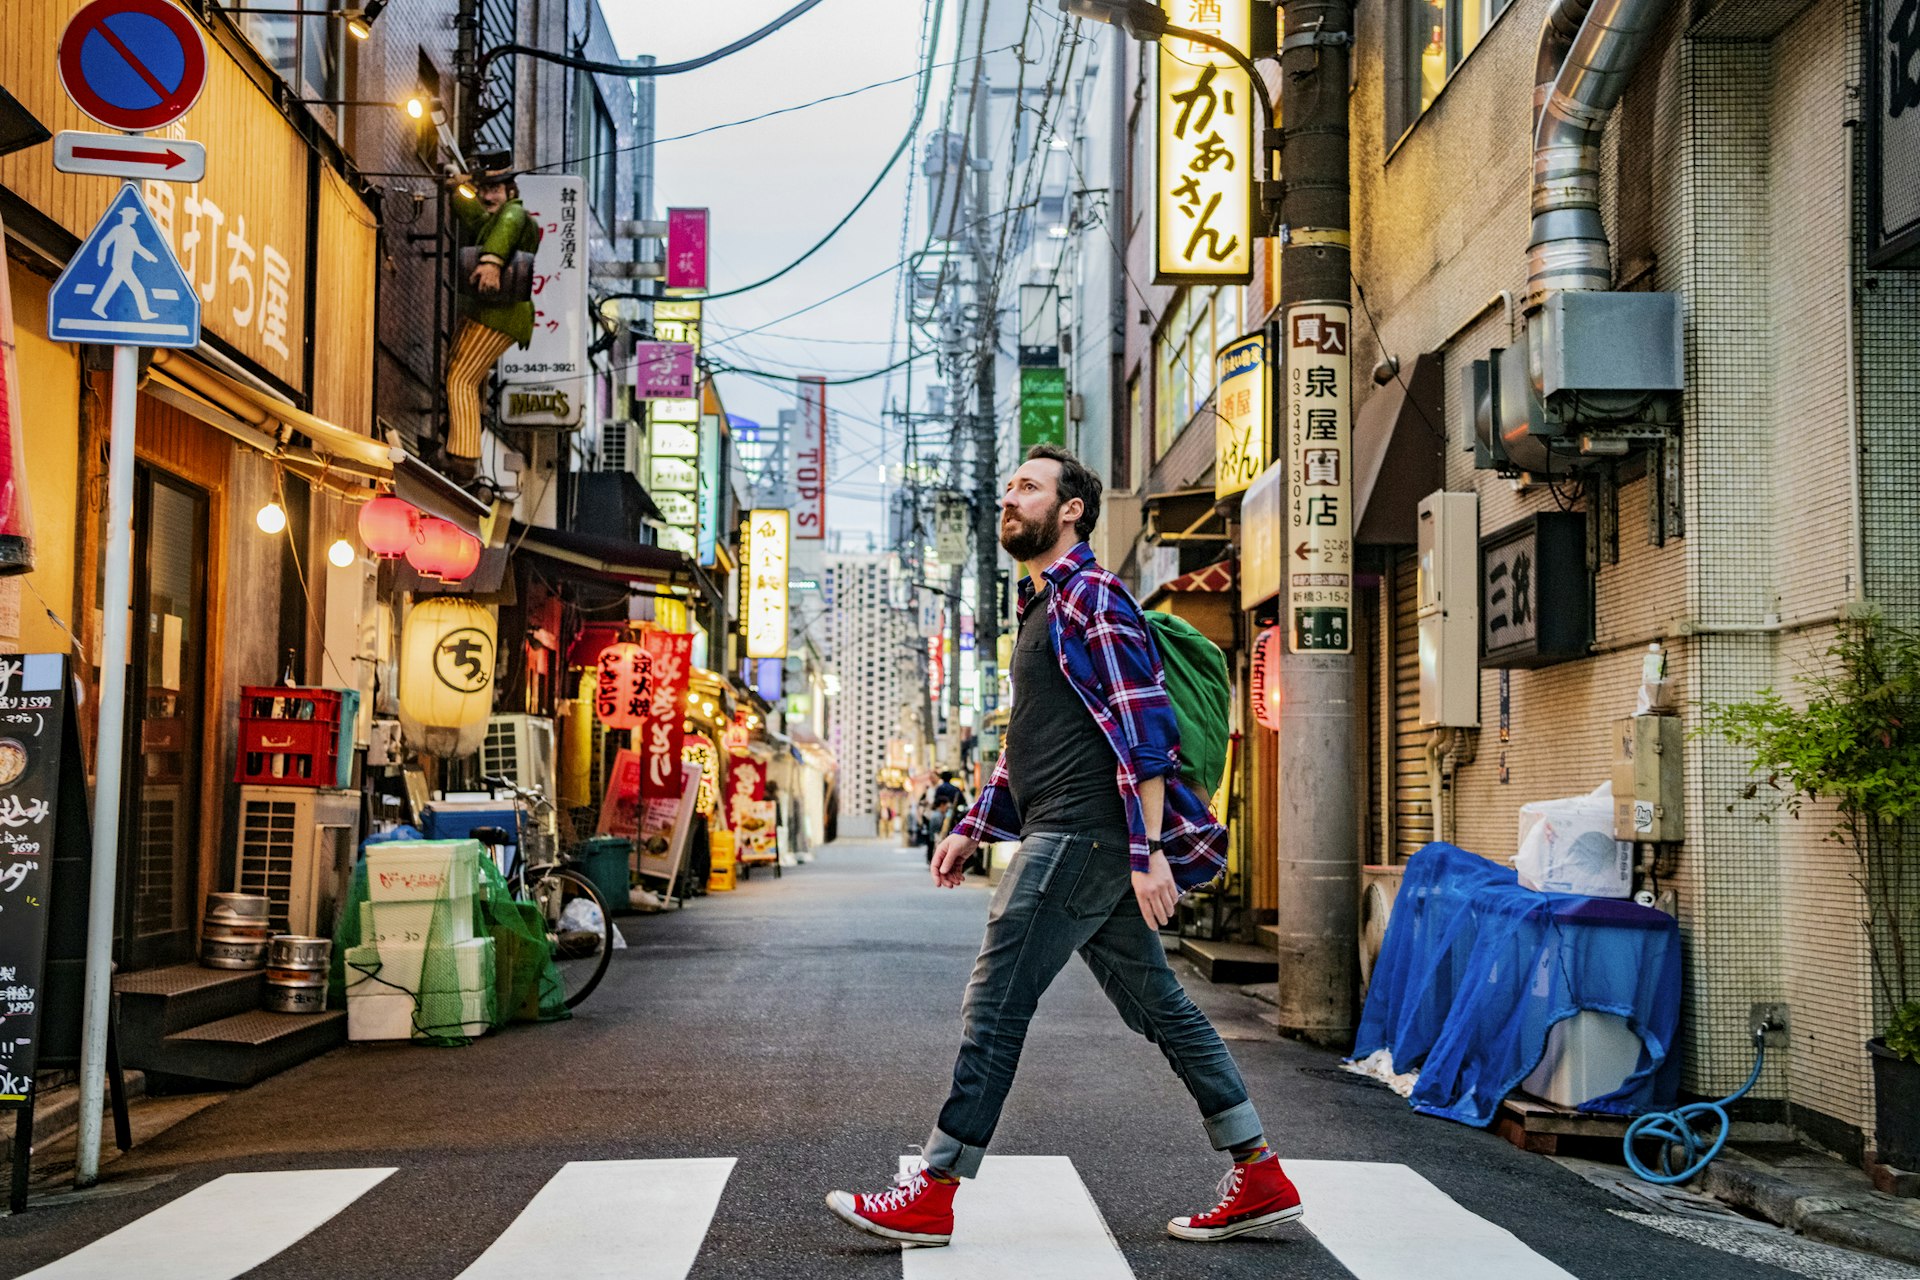 A white man walks across a Tokyo street lined with neon signs and paper lanterns